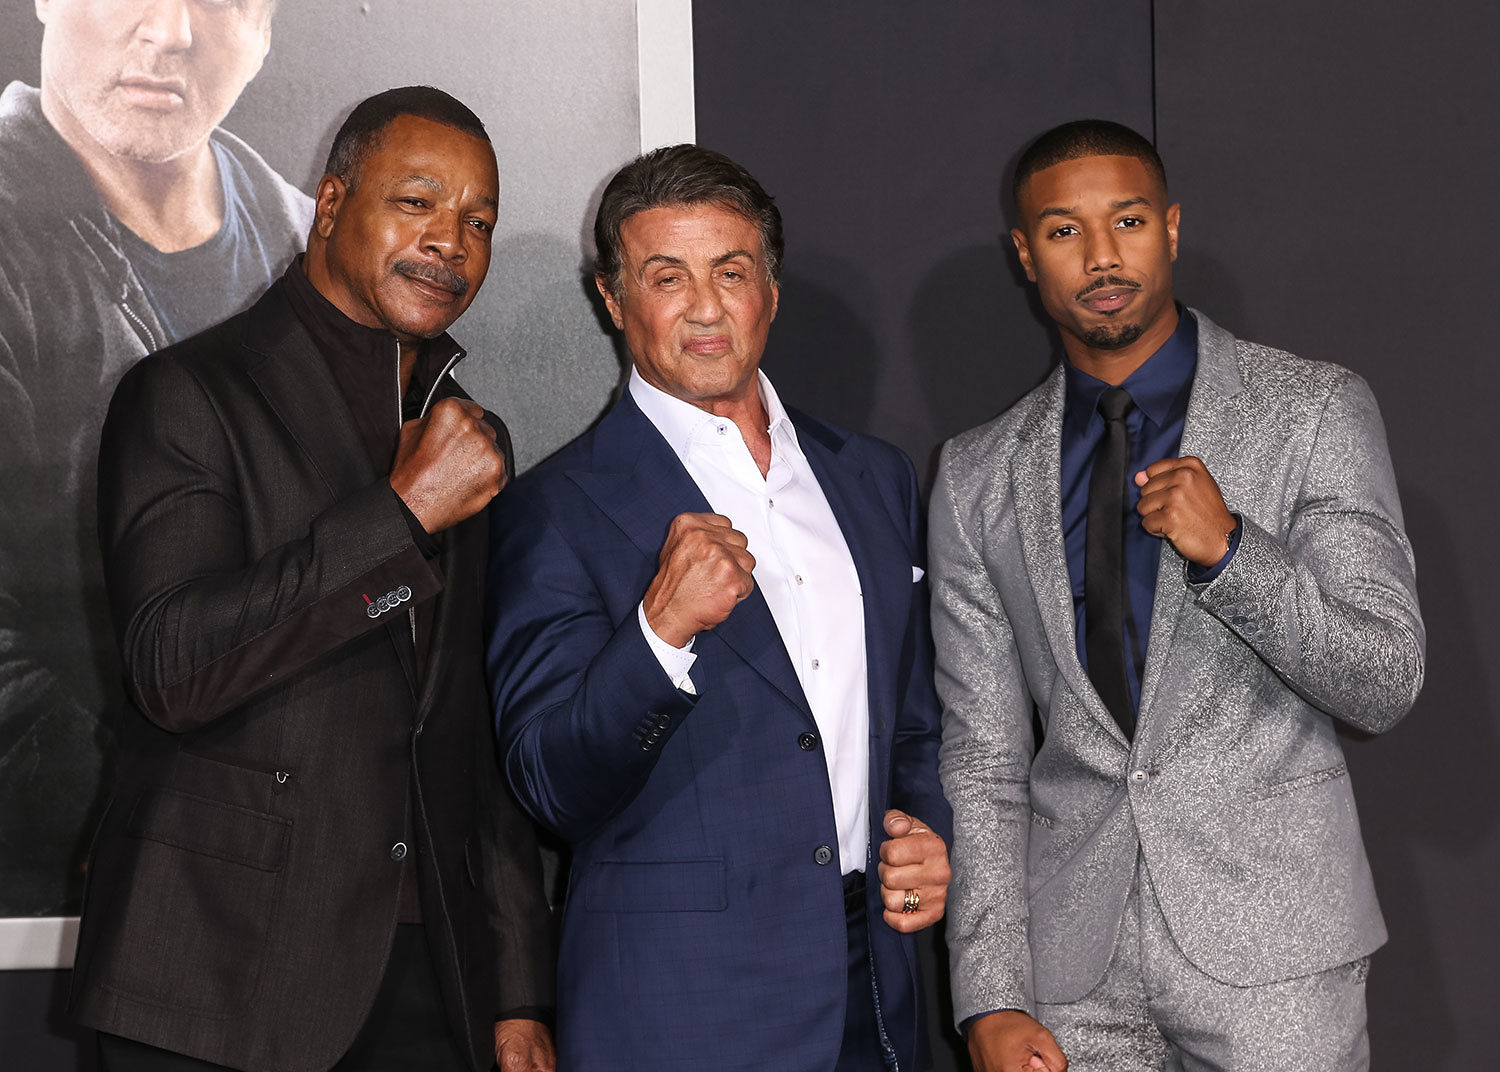 apollo-creed-actor-blesses-fictional-son-michael-b-jordan-s-depiction-of-adonis-in-creed-724234.jpg